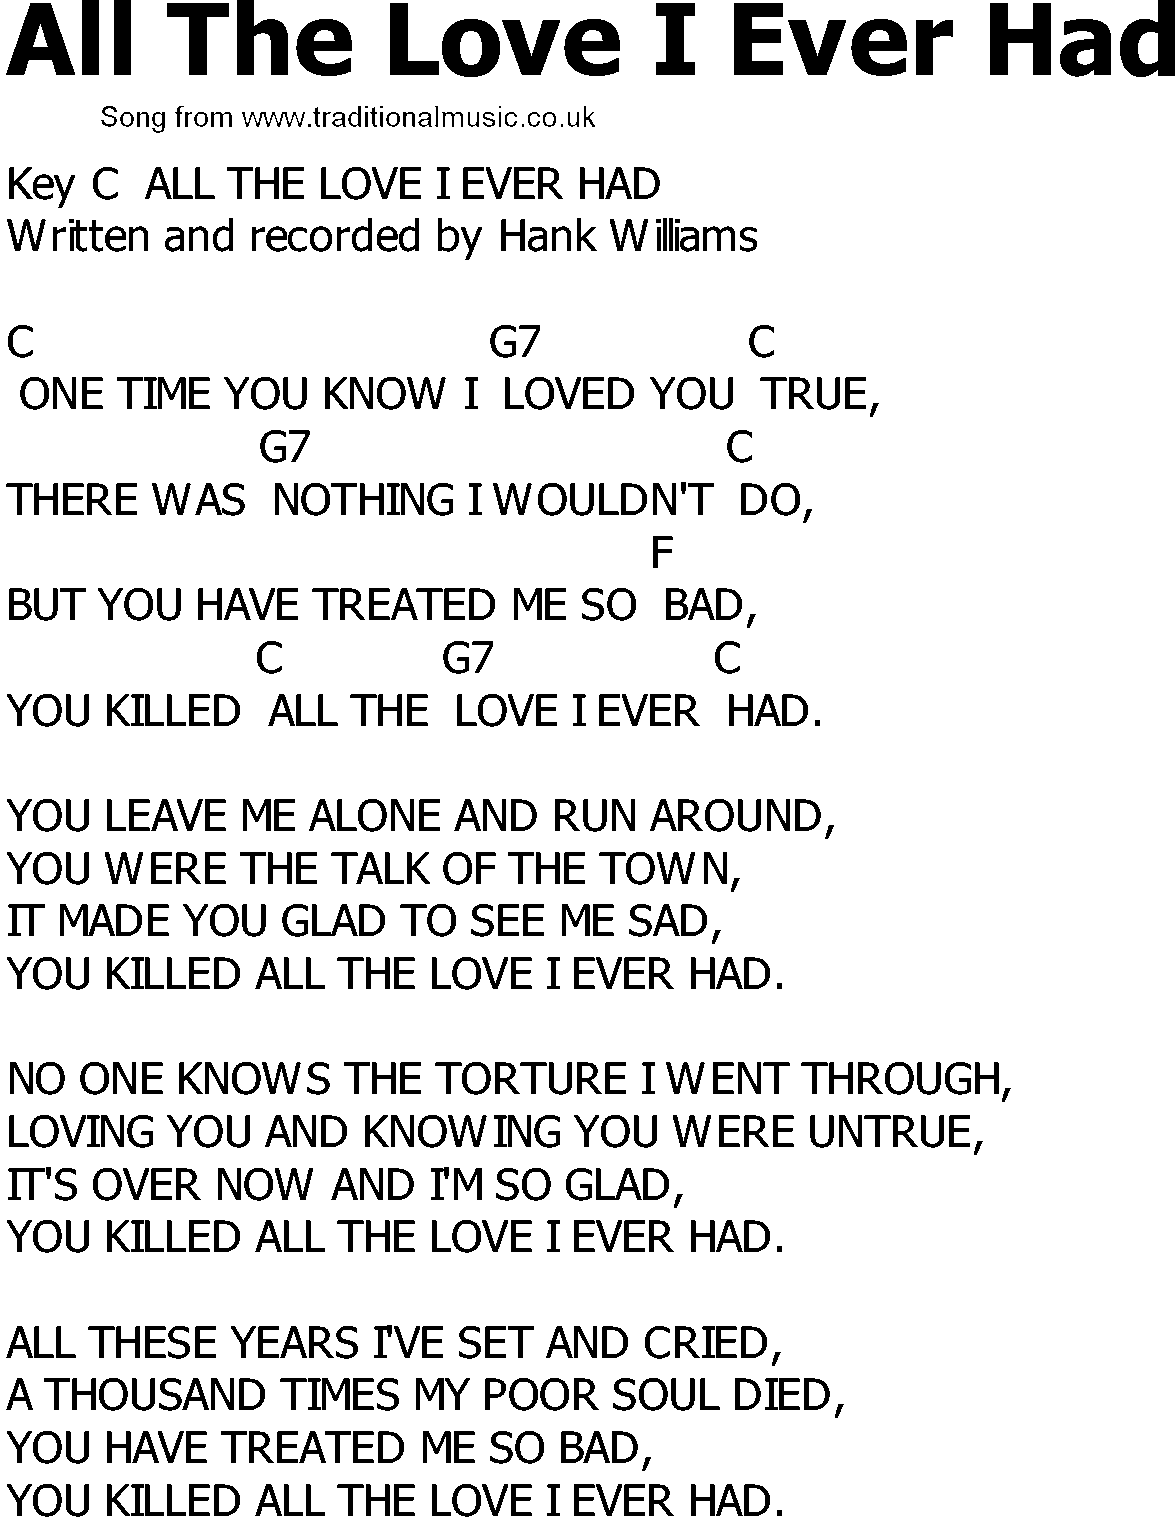 Old Country song lyrics with chords - All The Love I Ever Had